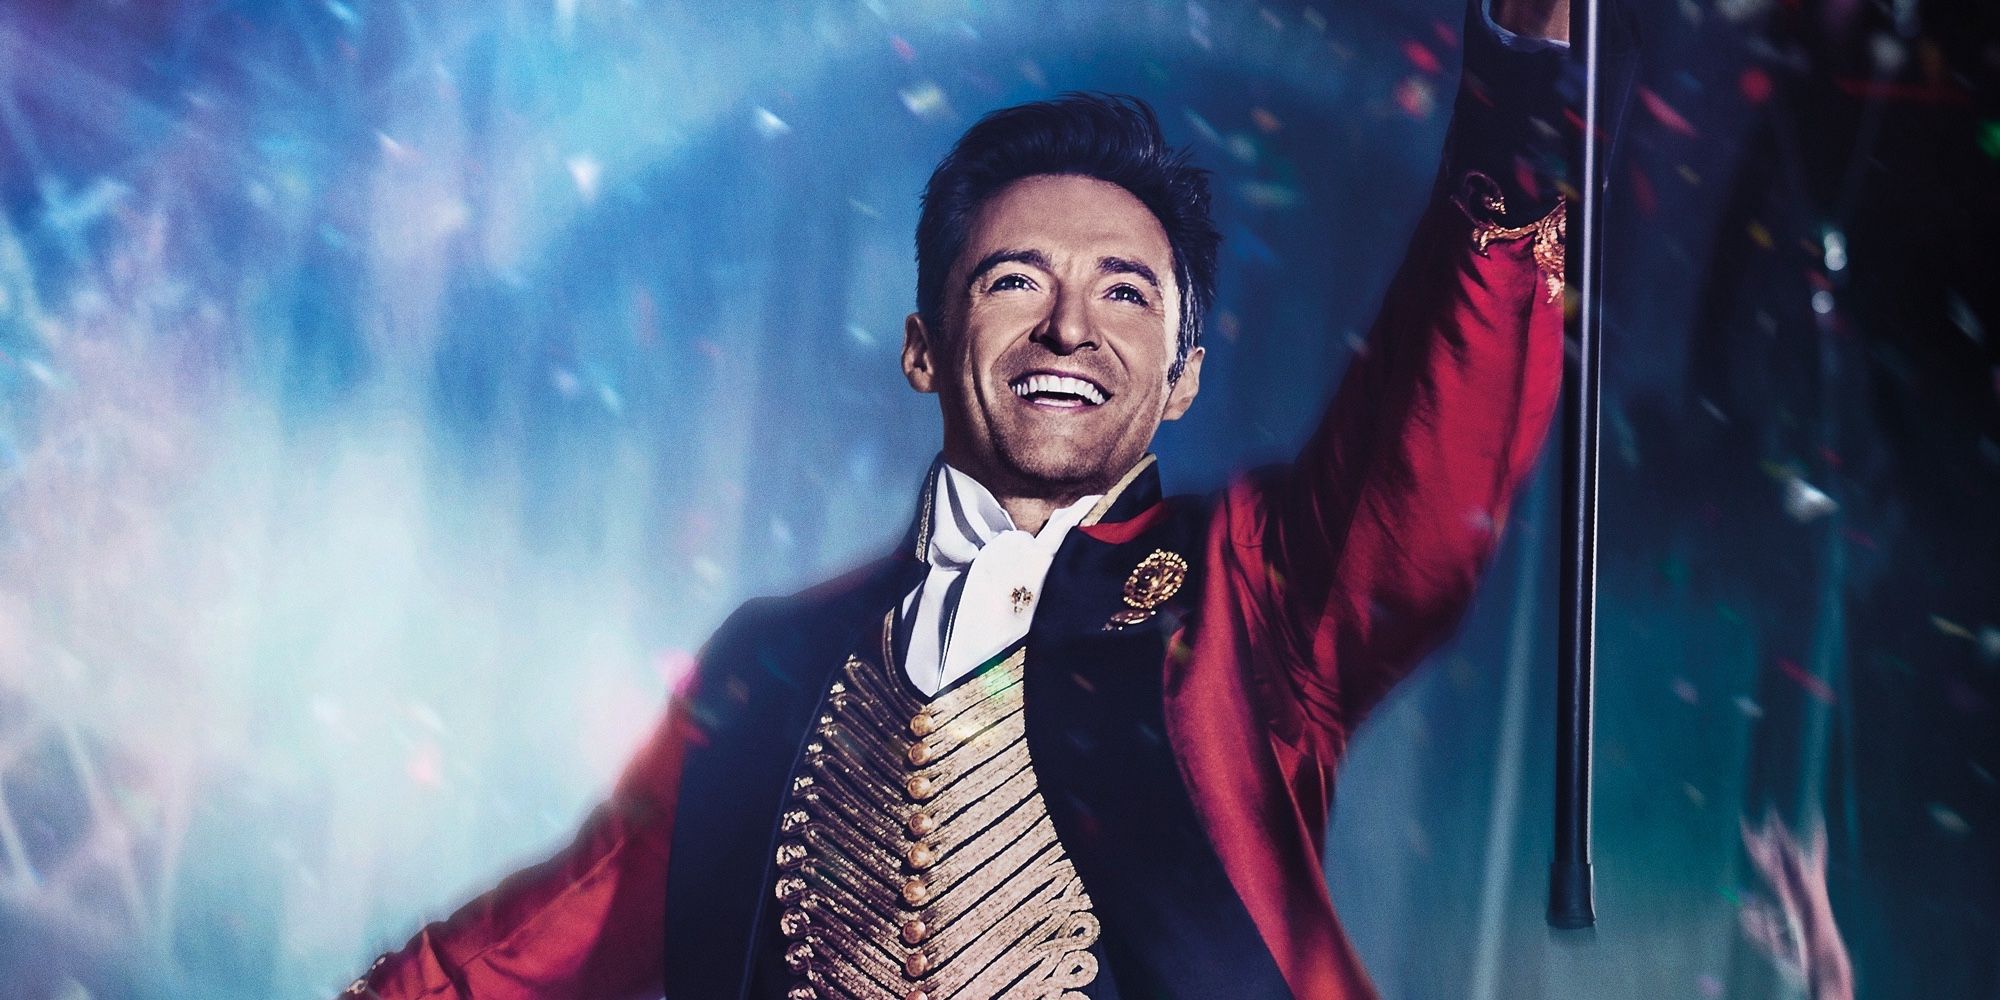 Greatest Showman Star Hugh Jackman Reveals There Could Be A Sequel